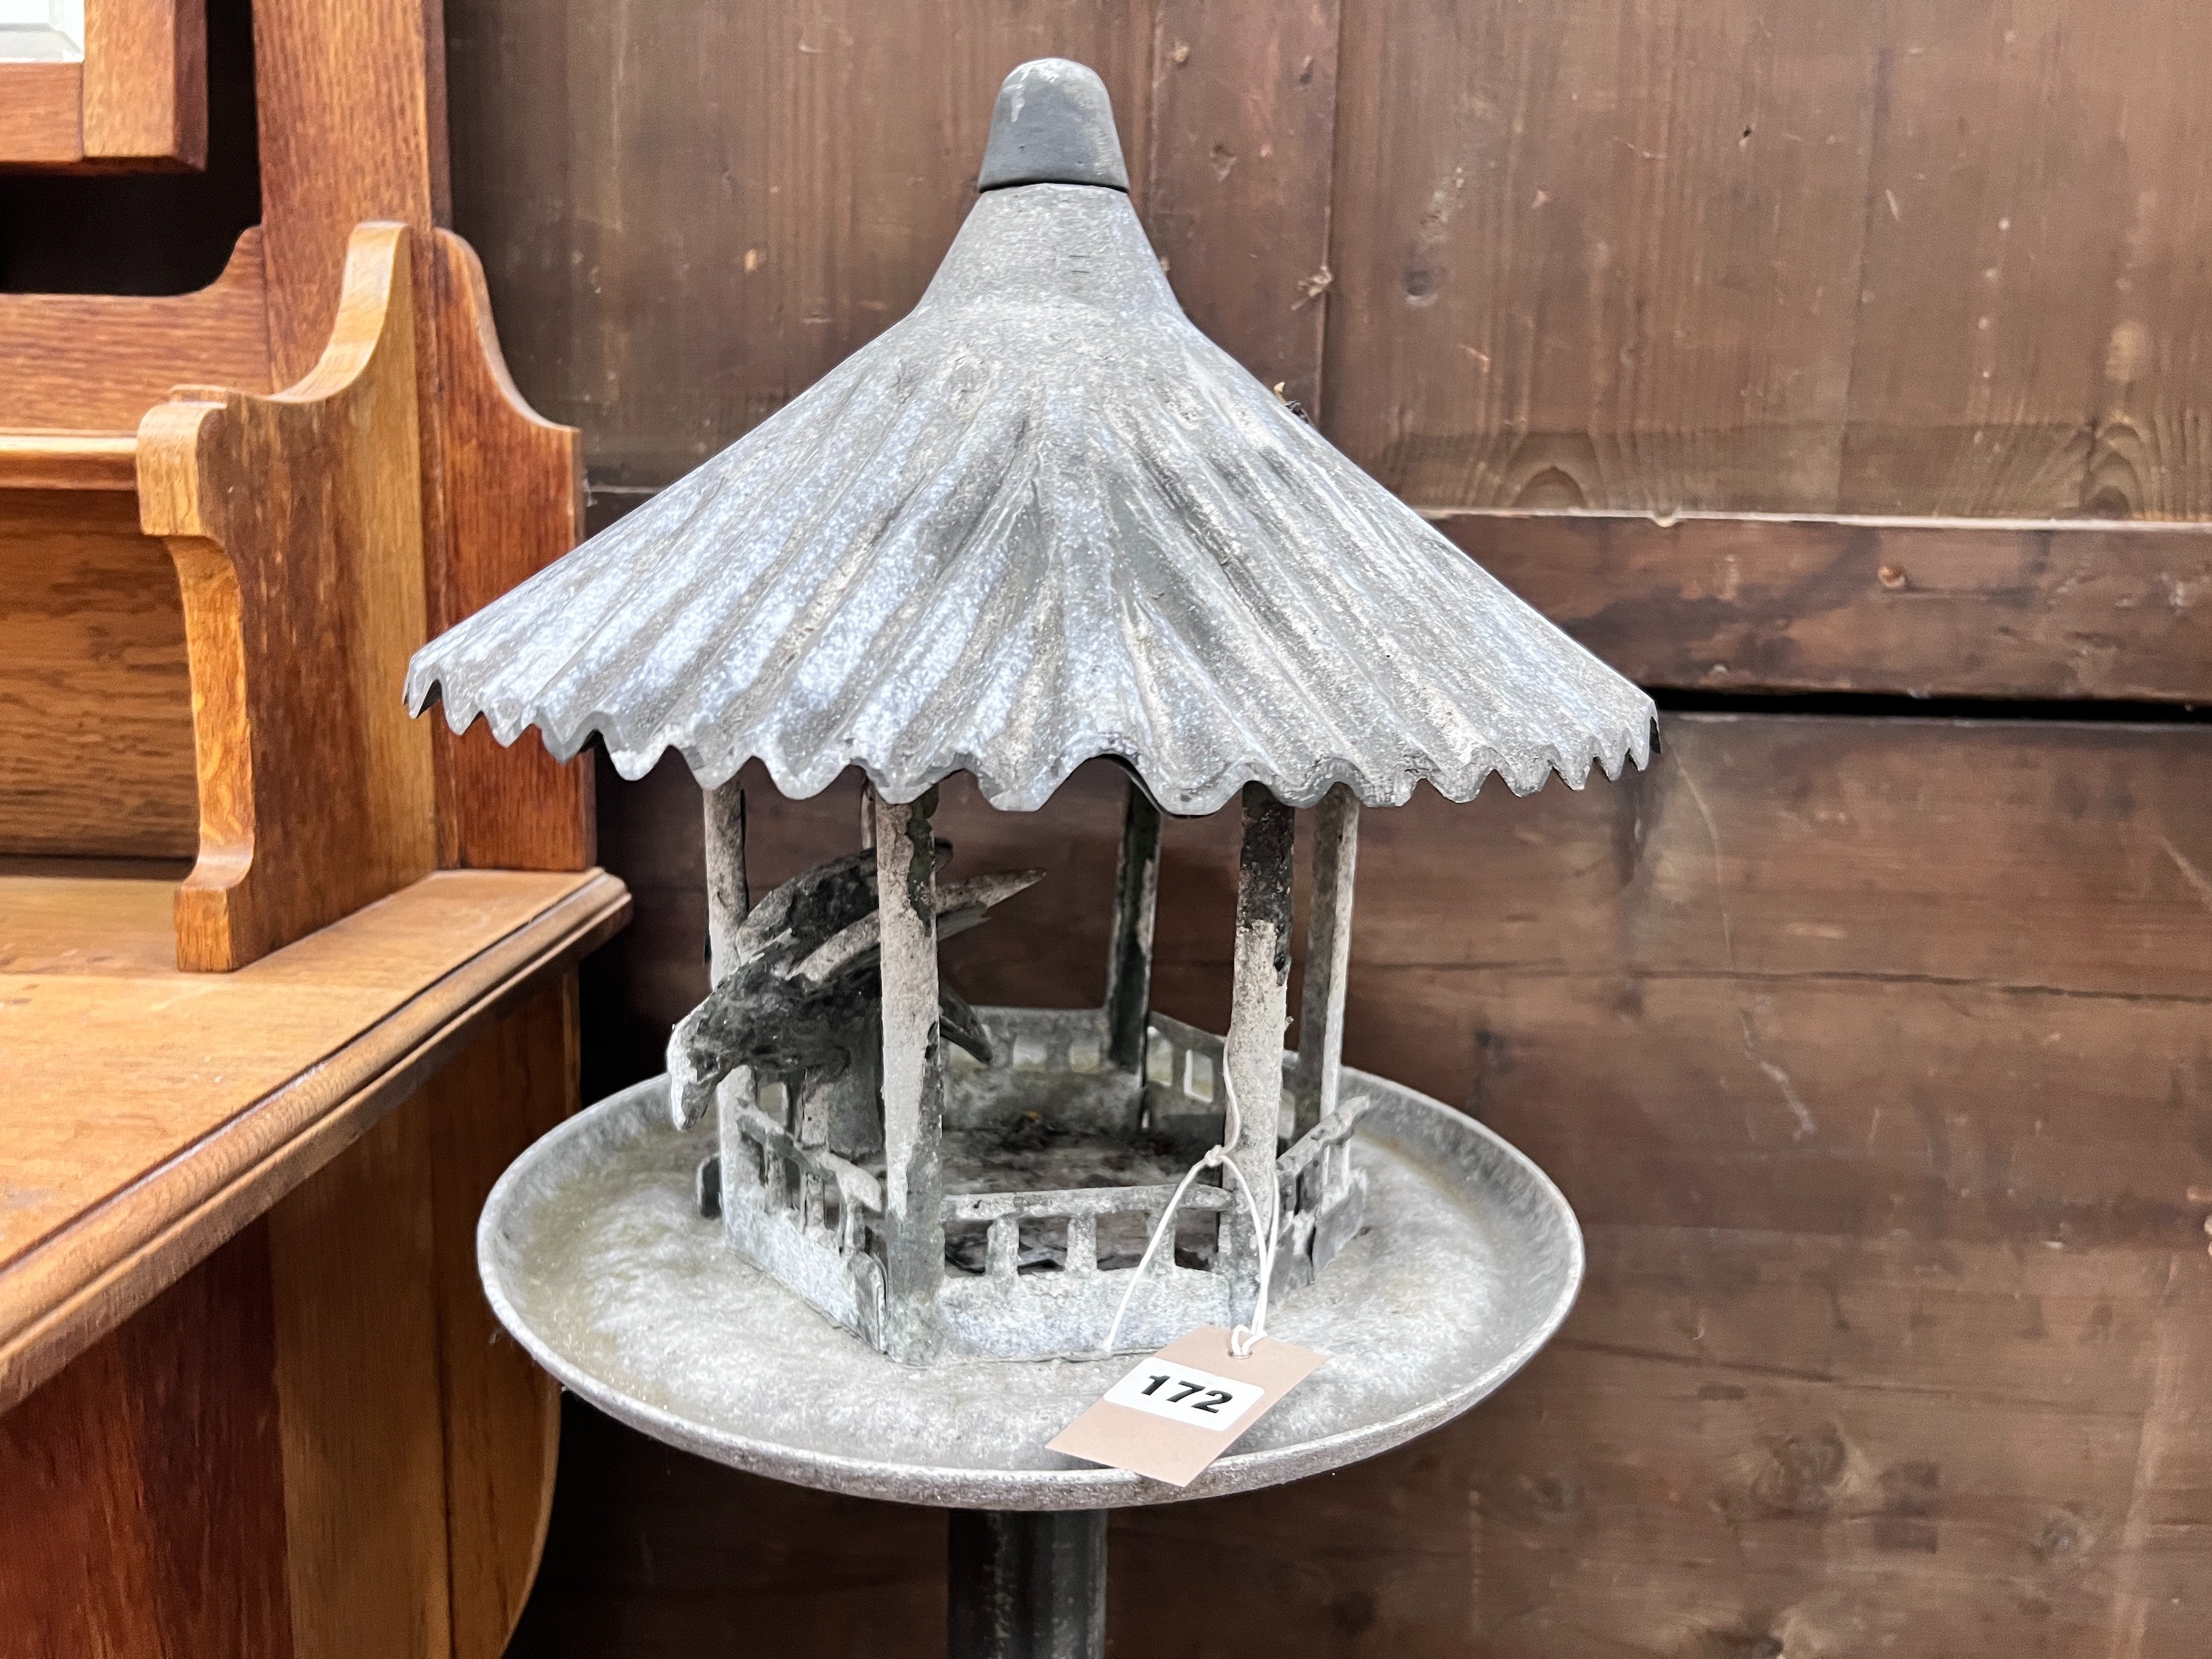 A cast iron and galvanised metal garden lantern / bird table, height 110cm *Please note the sale commences at 9am.